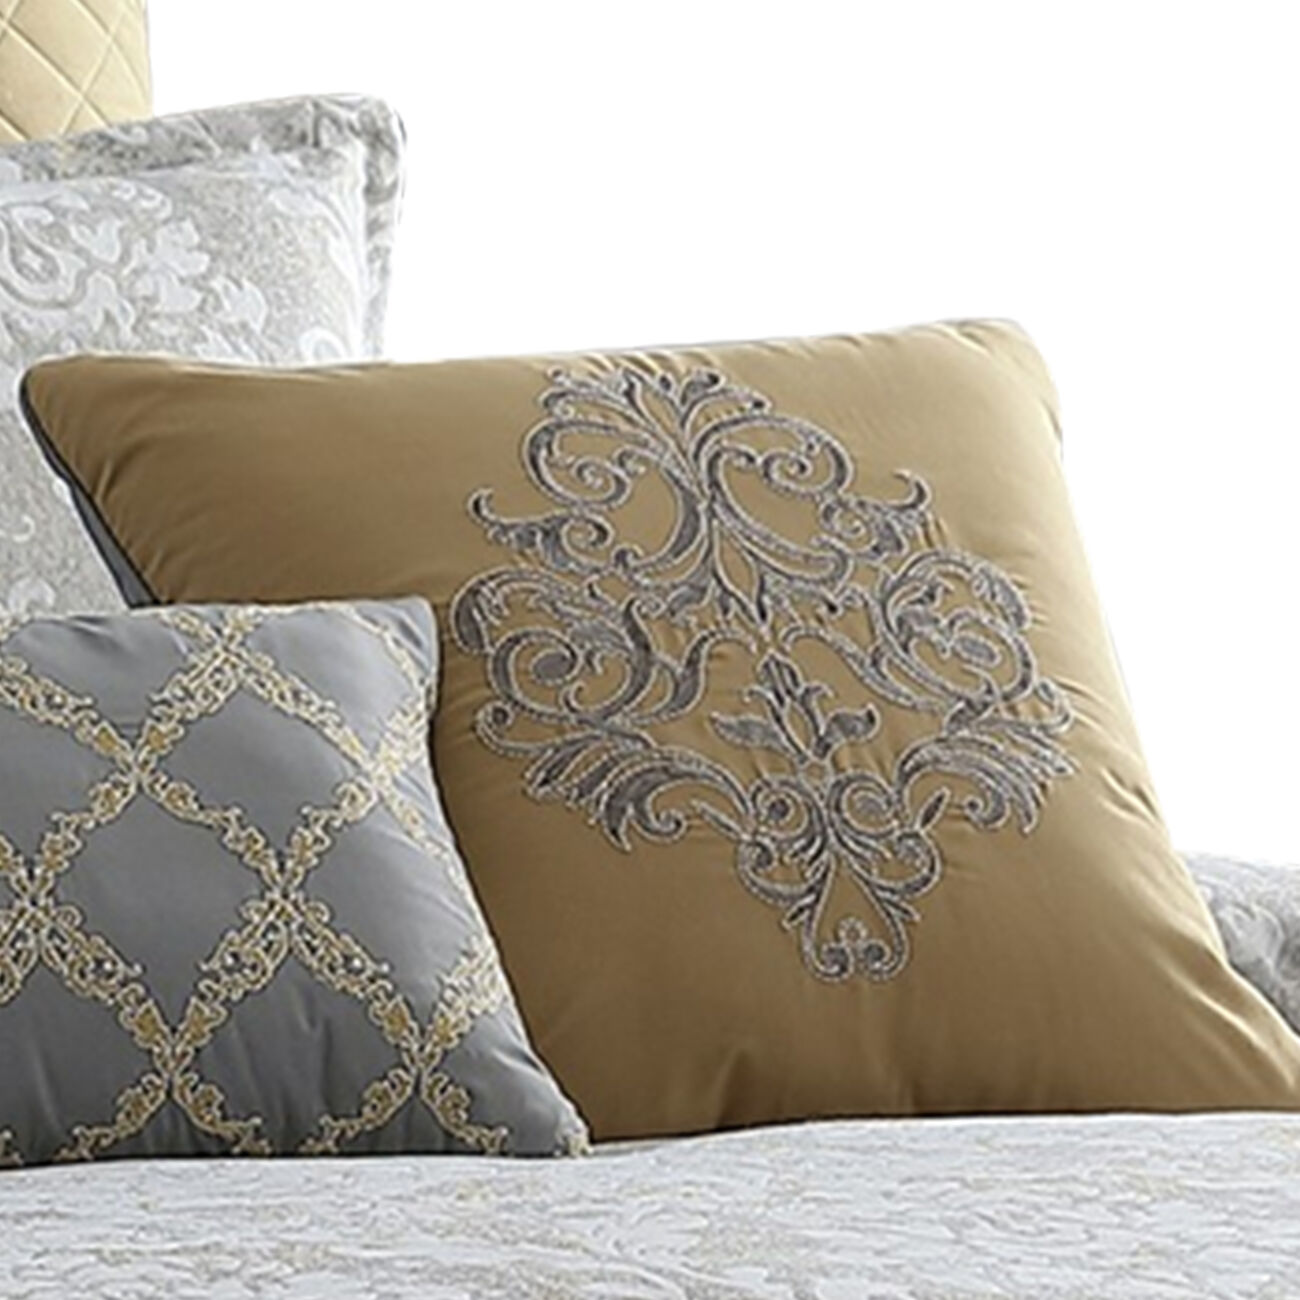 8 Piece Queen Polyester Comforter Set with Medallion Print, Gray and Gold